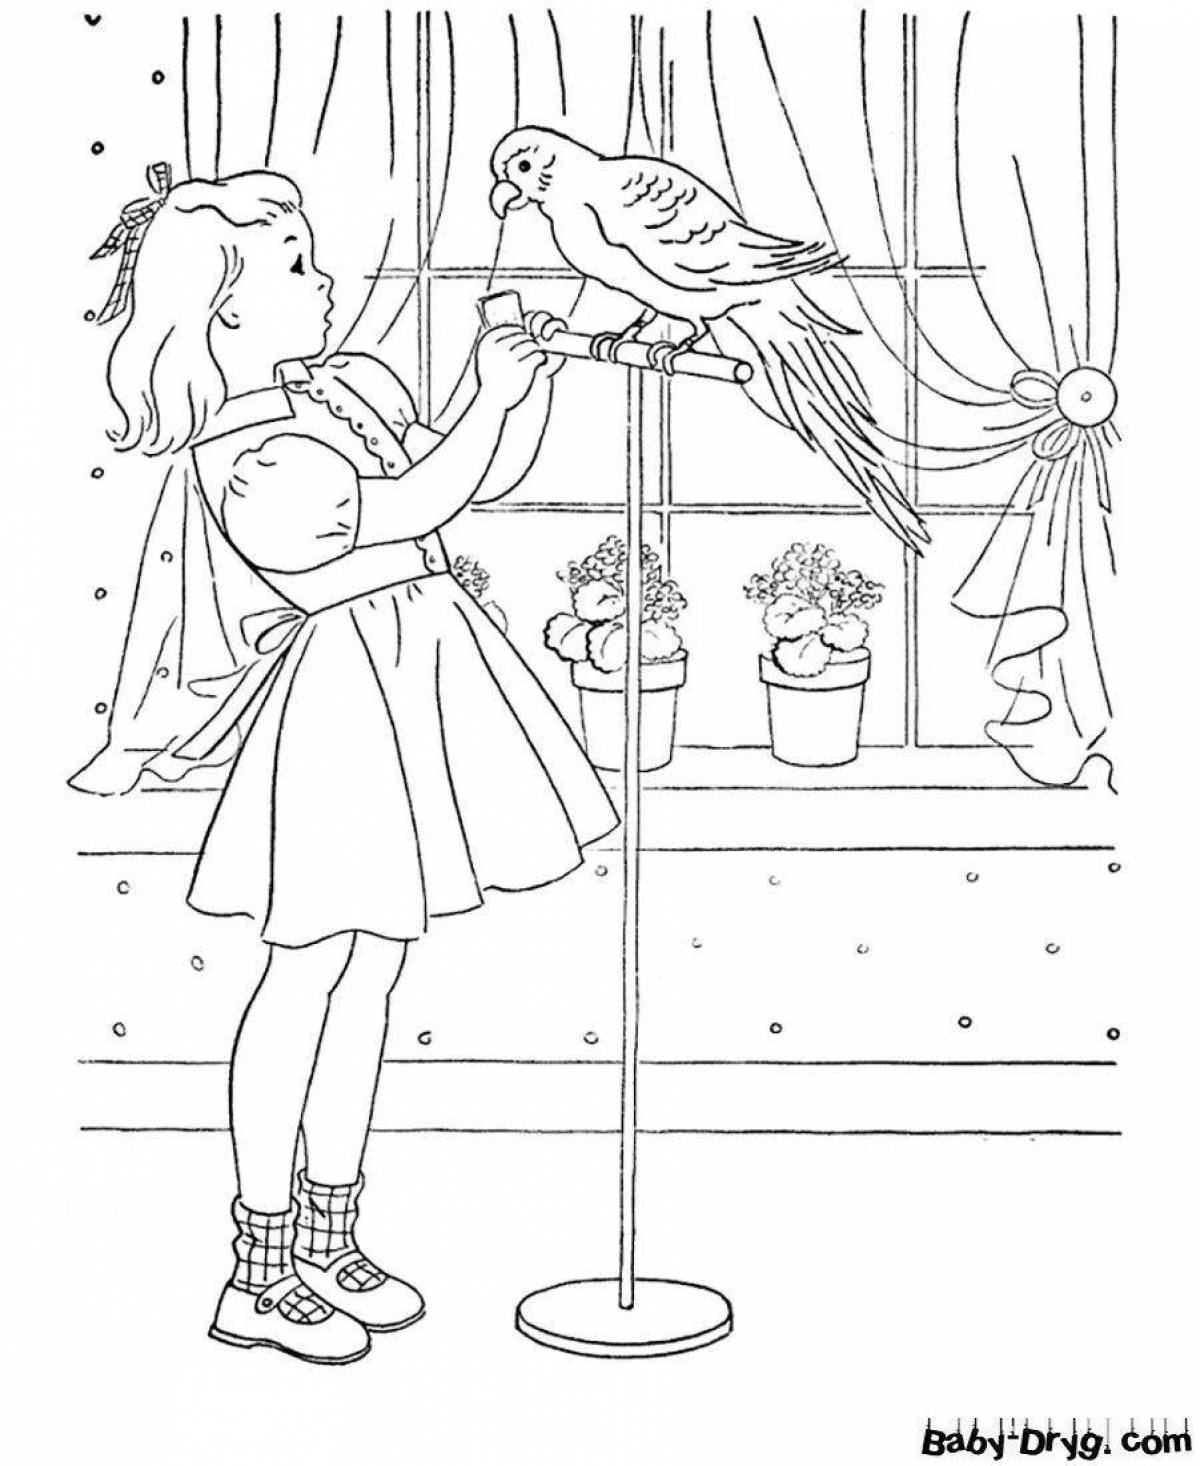 Adorable coloring page of our bird friends